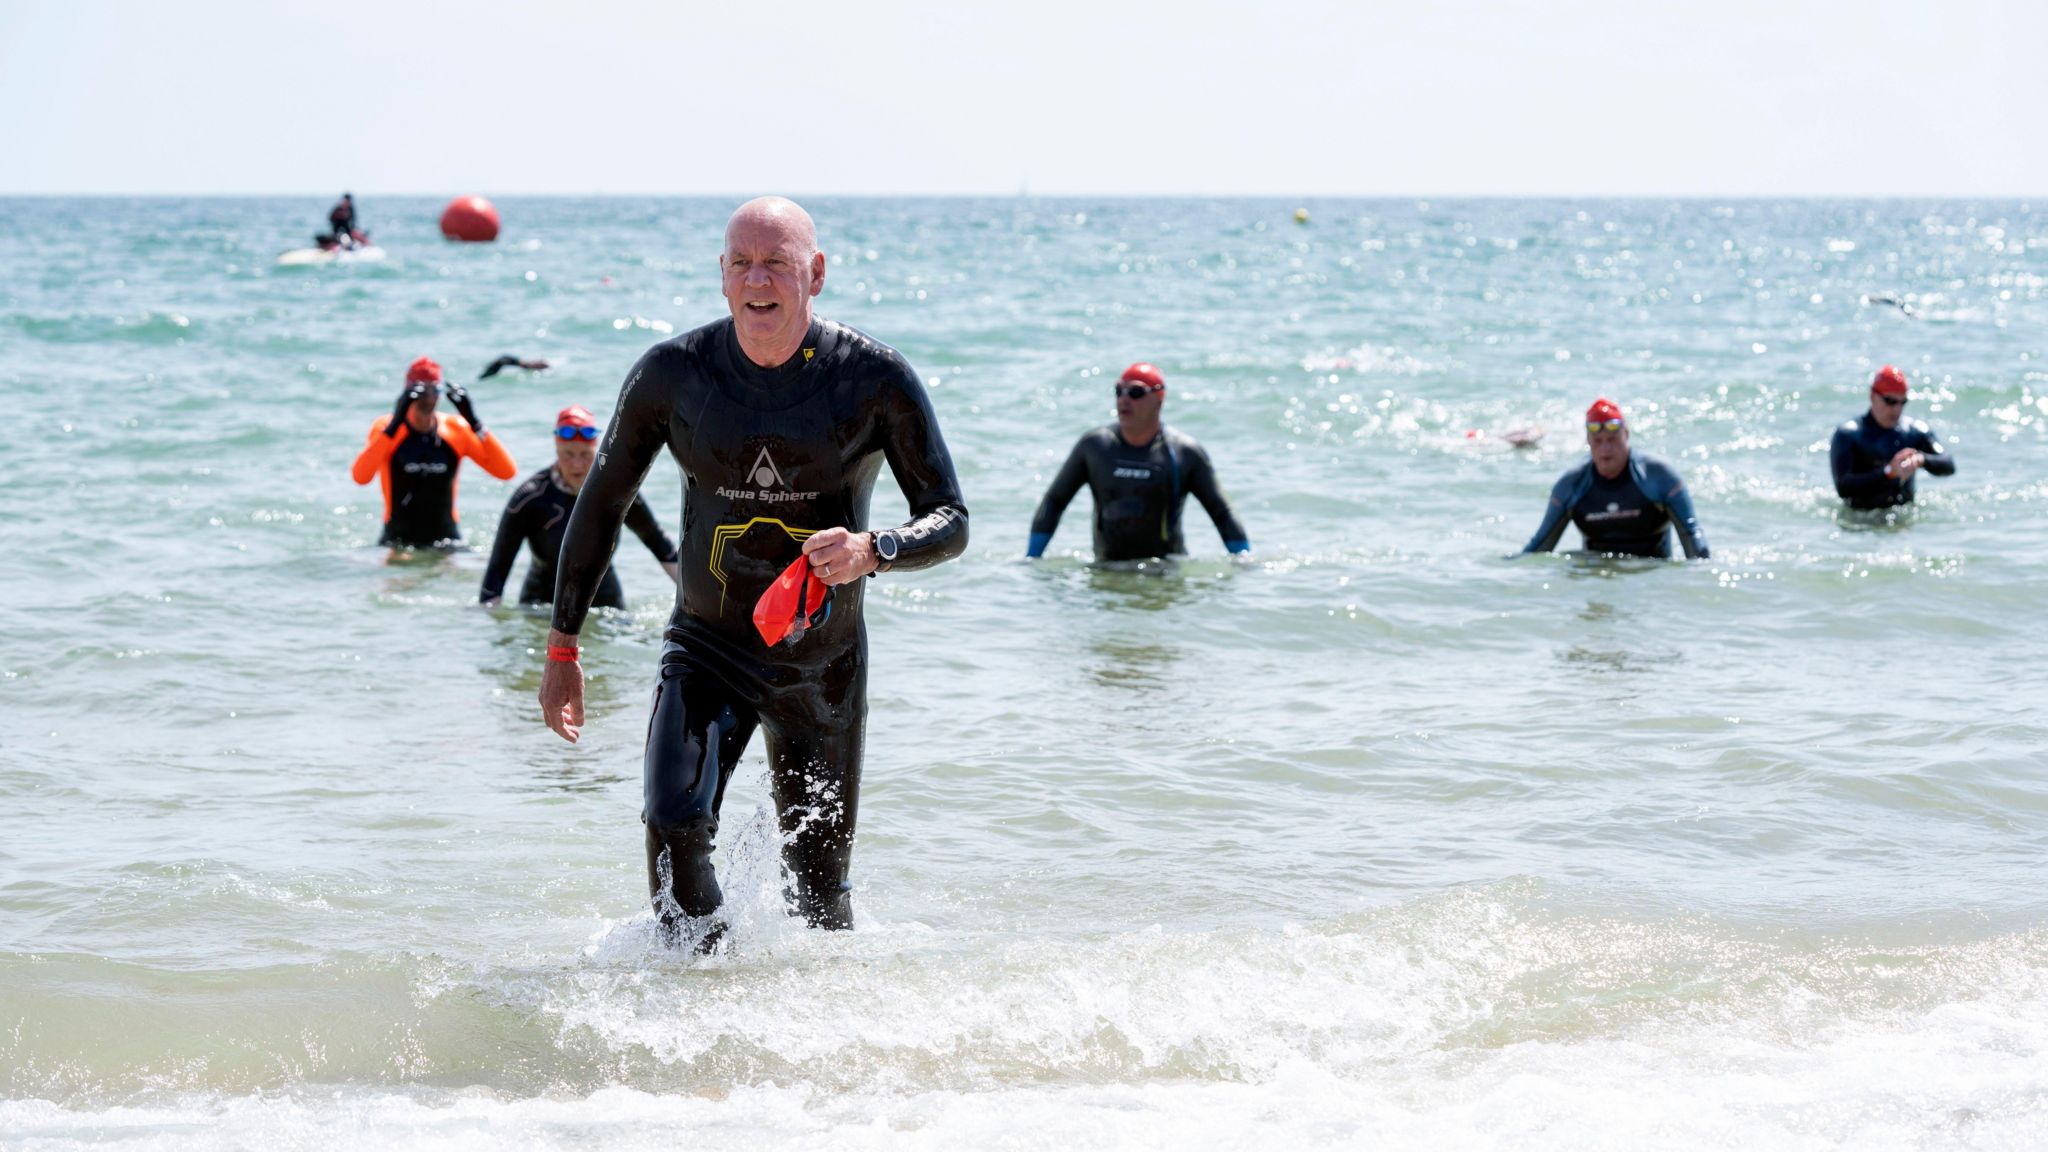 A group of swimmers wading out of the sea. One man can be seen at the front of the group holding his swim cap and goggles after removing them.